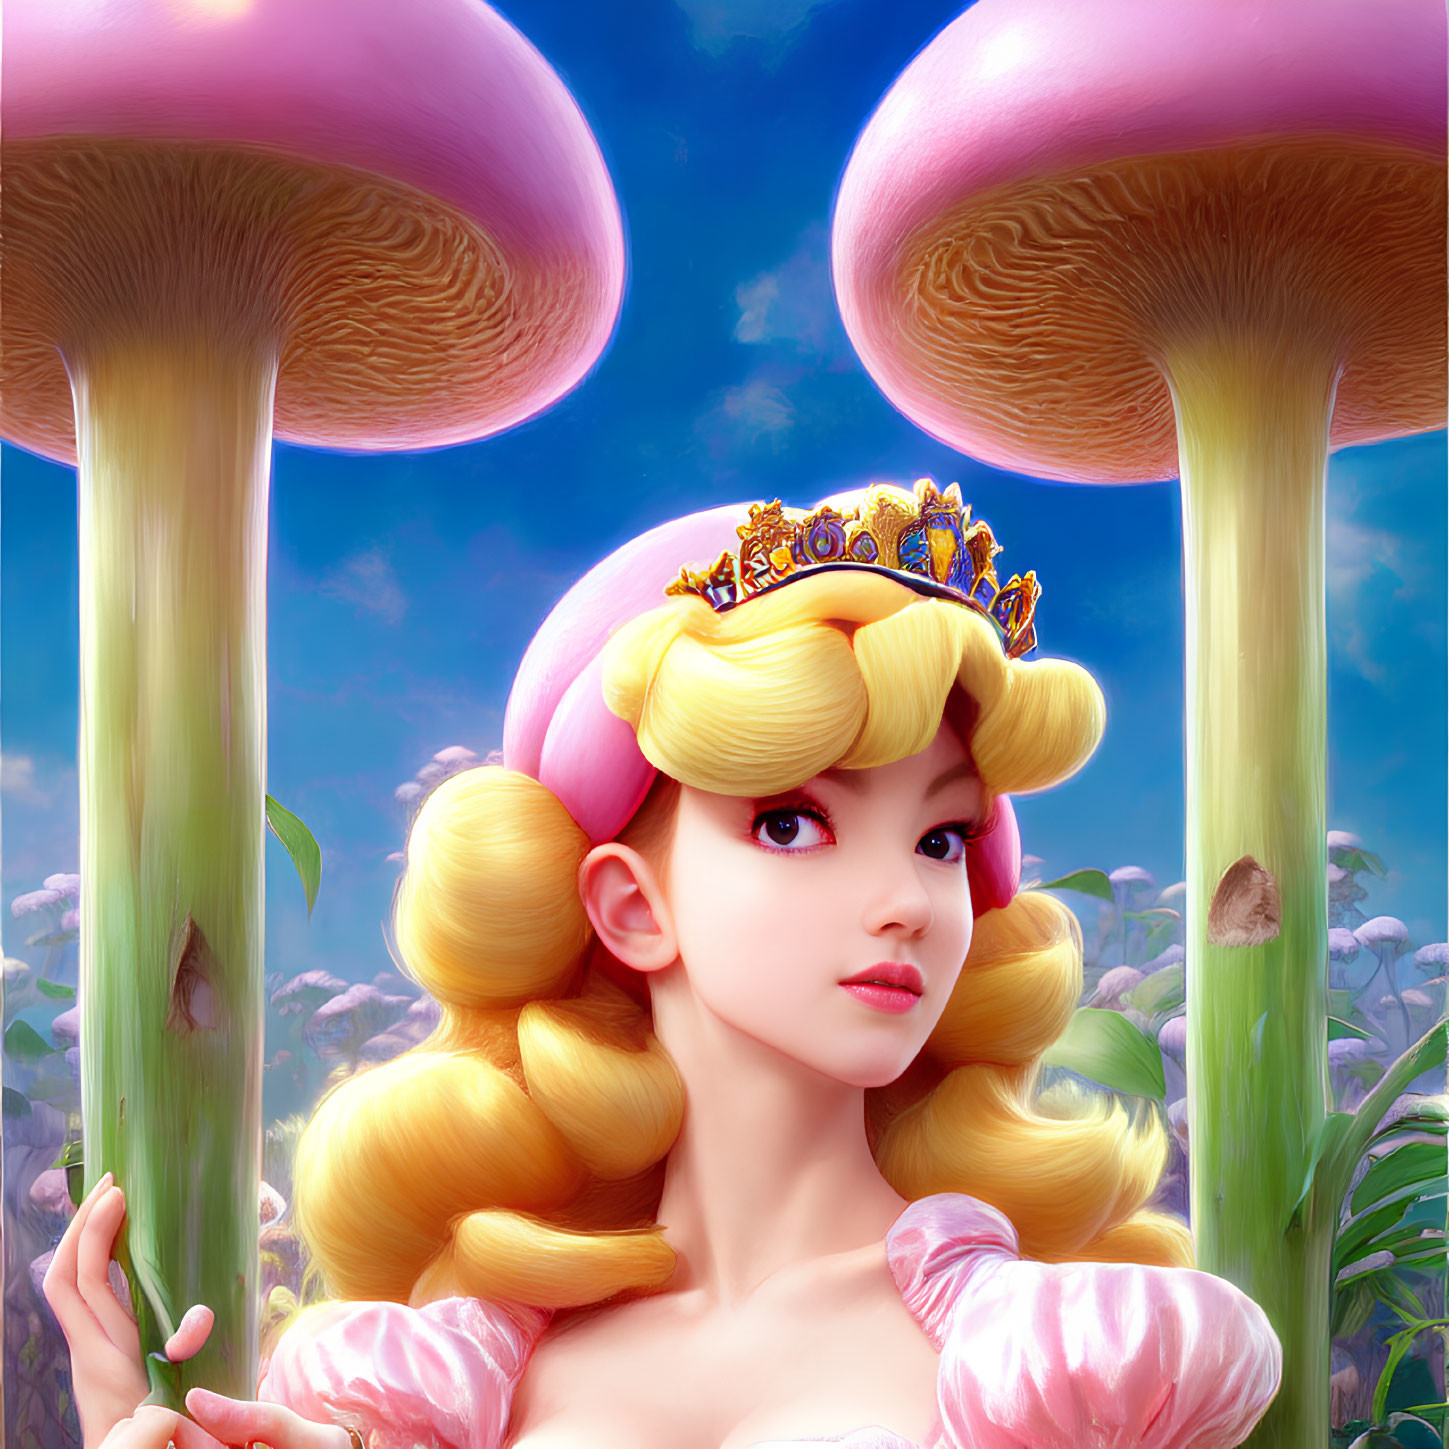 Stylized Princess Peach illustration with whimsical mushrooms and blue sky